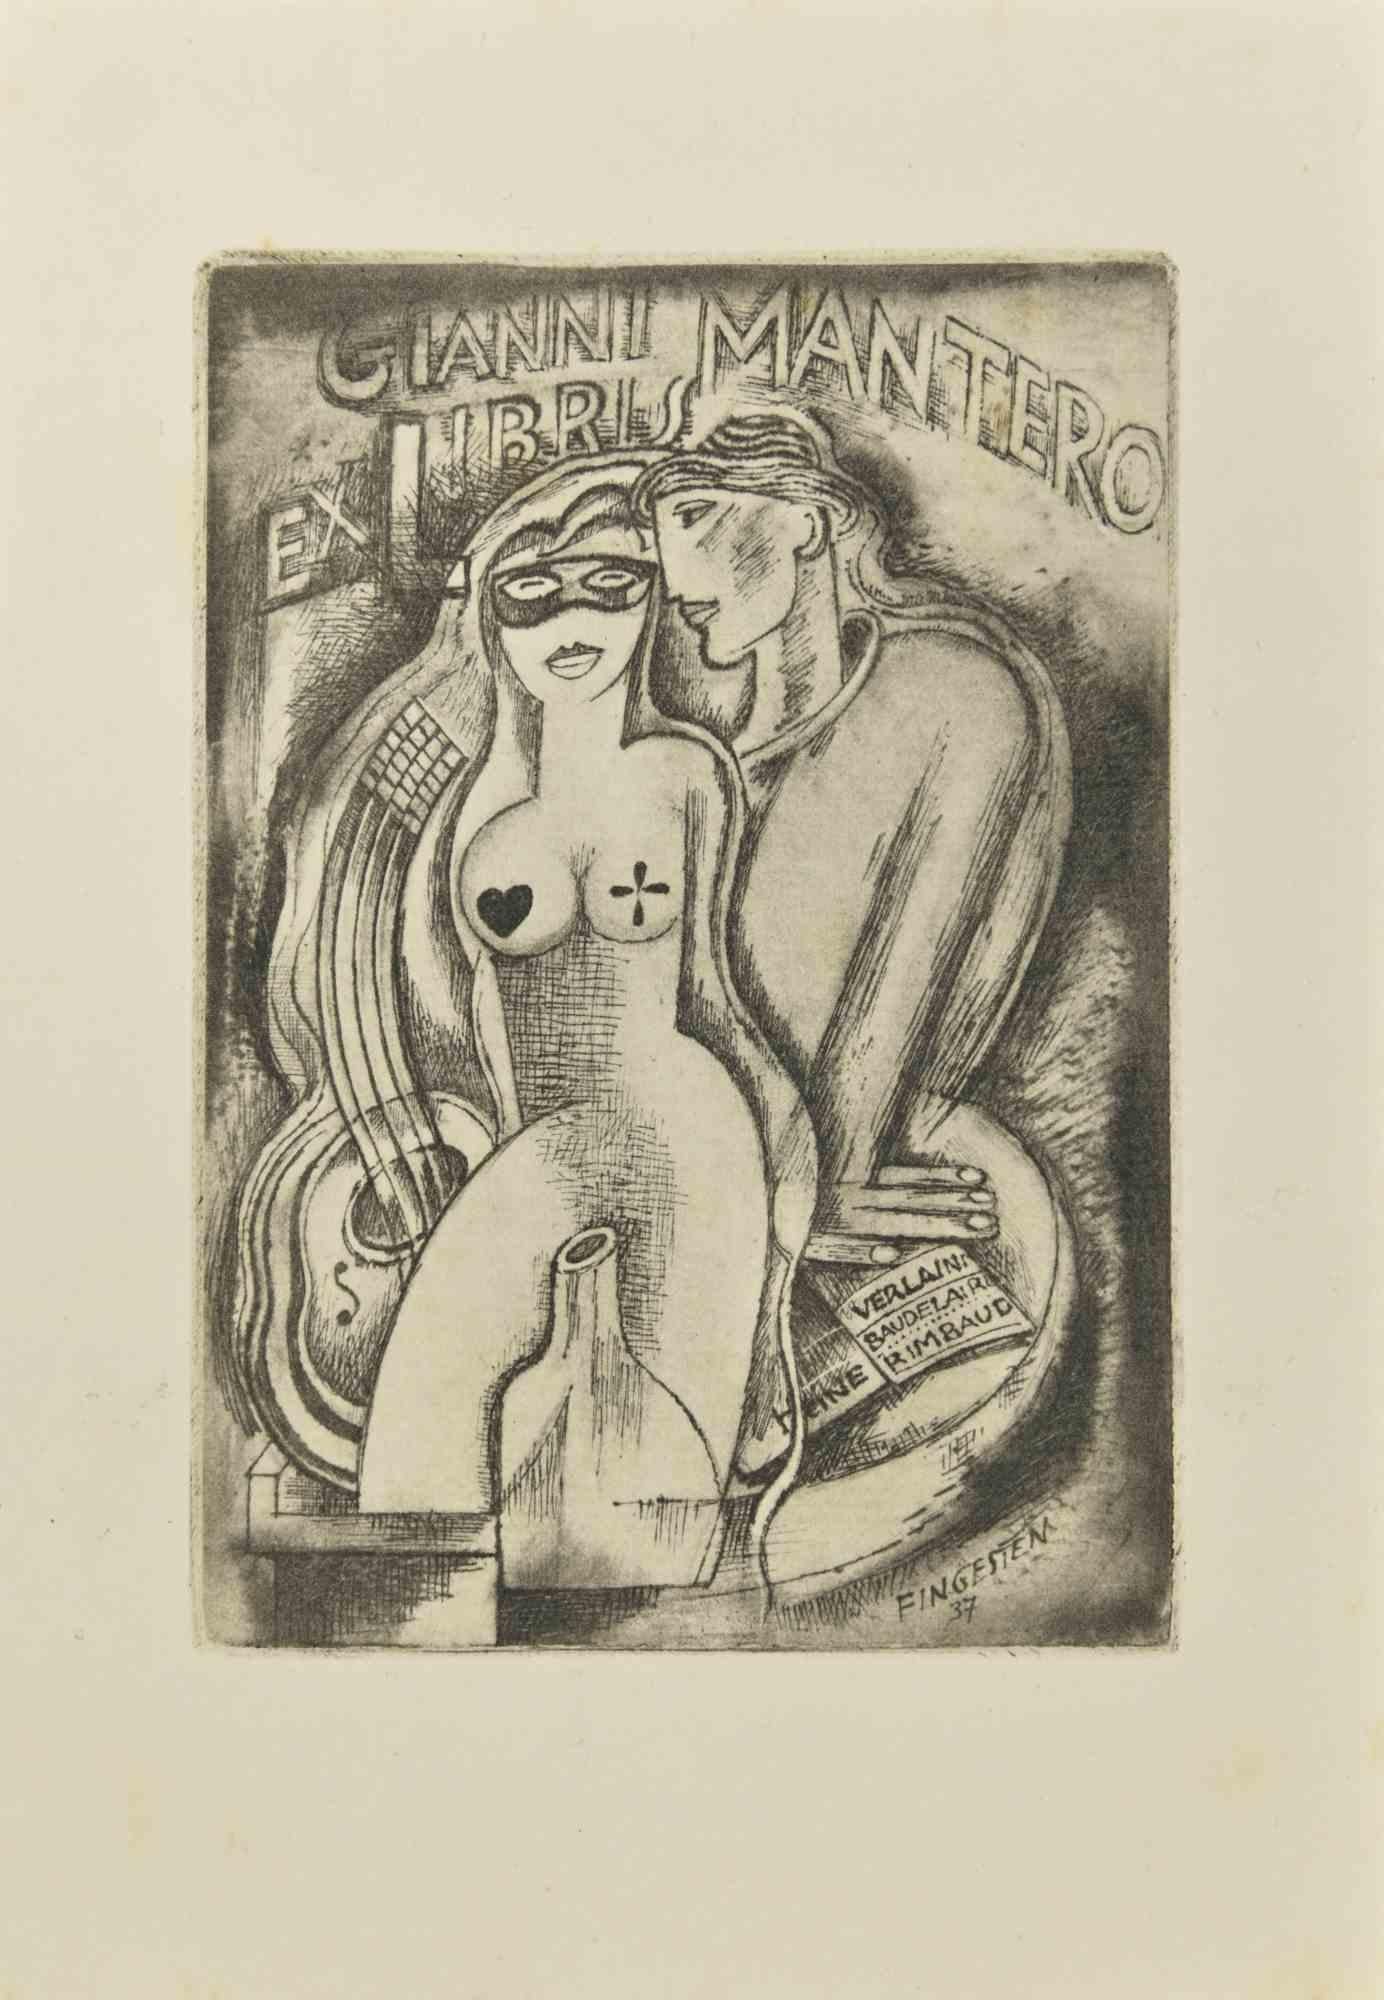 Ex Libris - Gianni Mantero is an Etching print created by  Michel Fingesten in 1937.

Signed on plate and dated on  the lower right margin.

Good conditions except some foxings that doesn't affect the image.

Michel Fingesten (1884 - 1943) was a